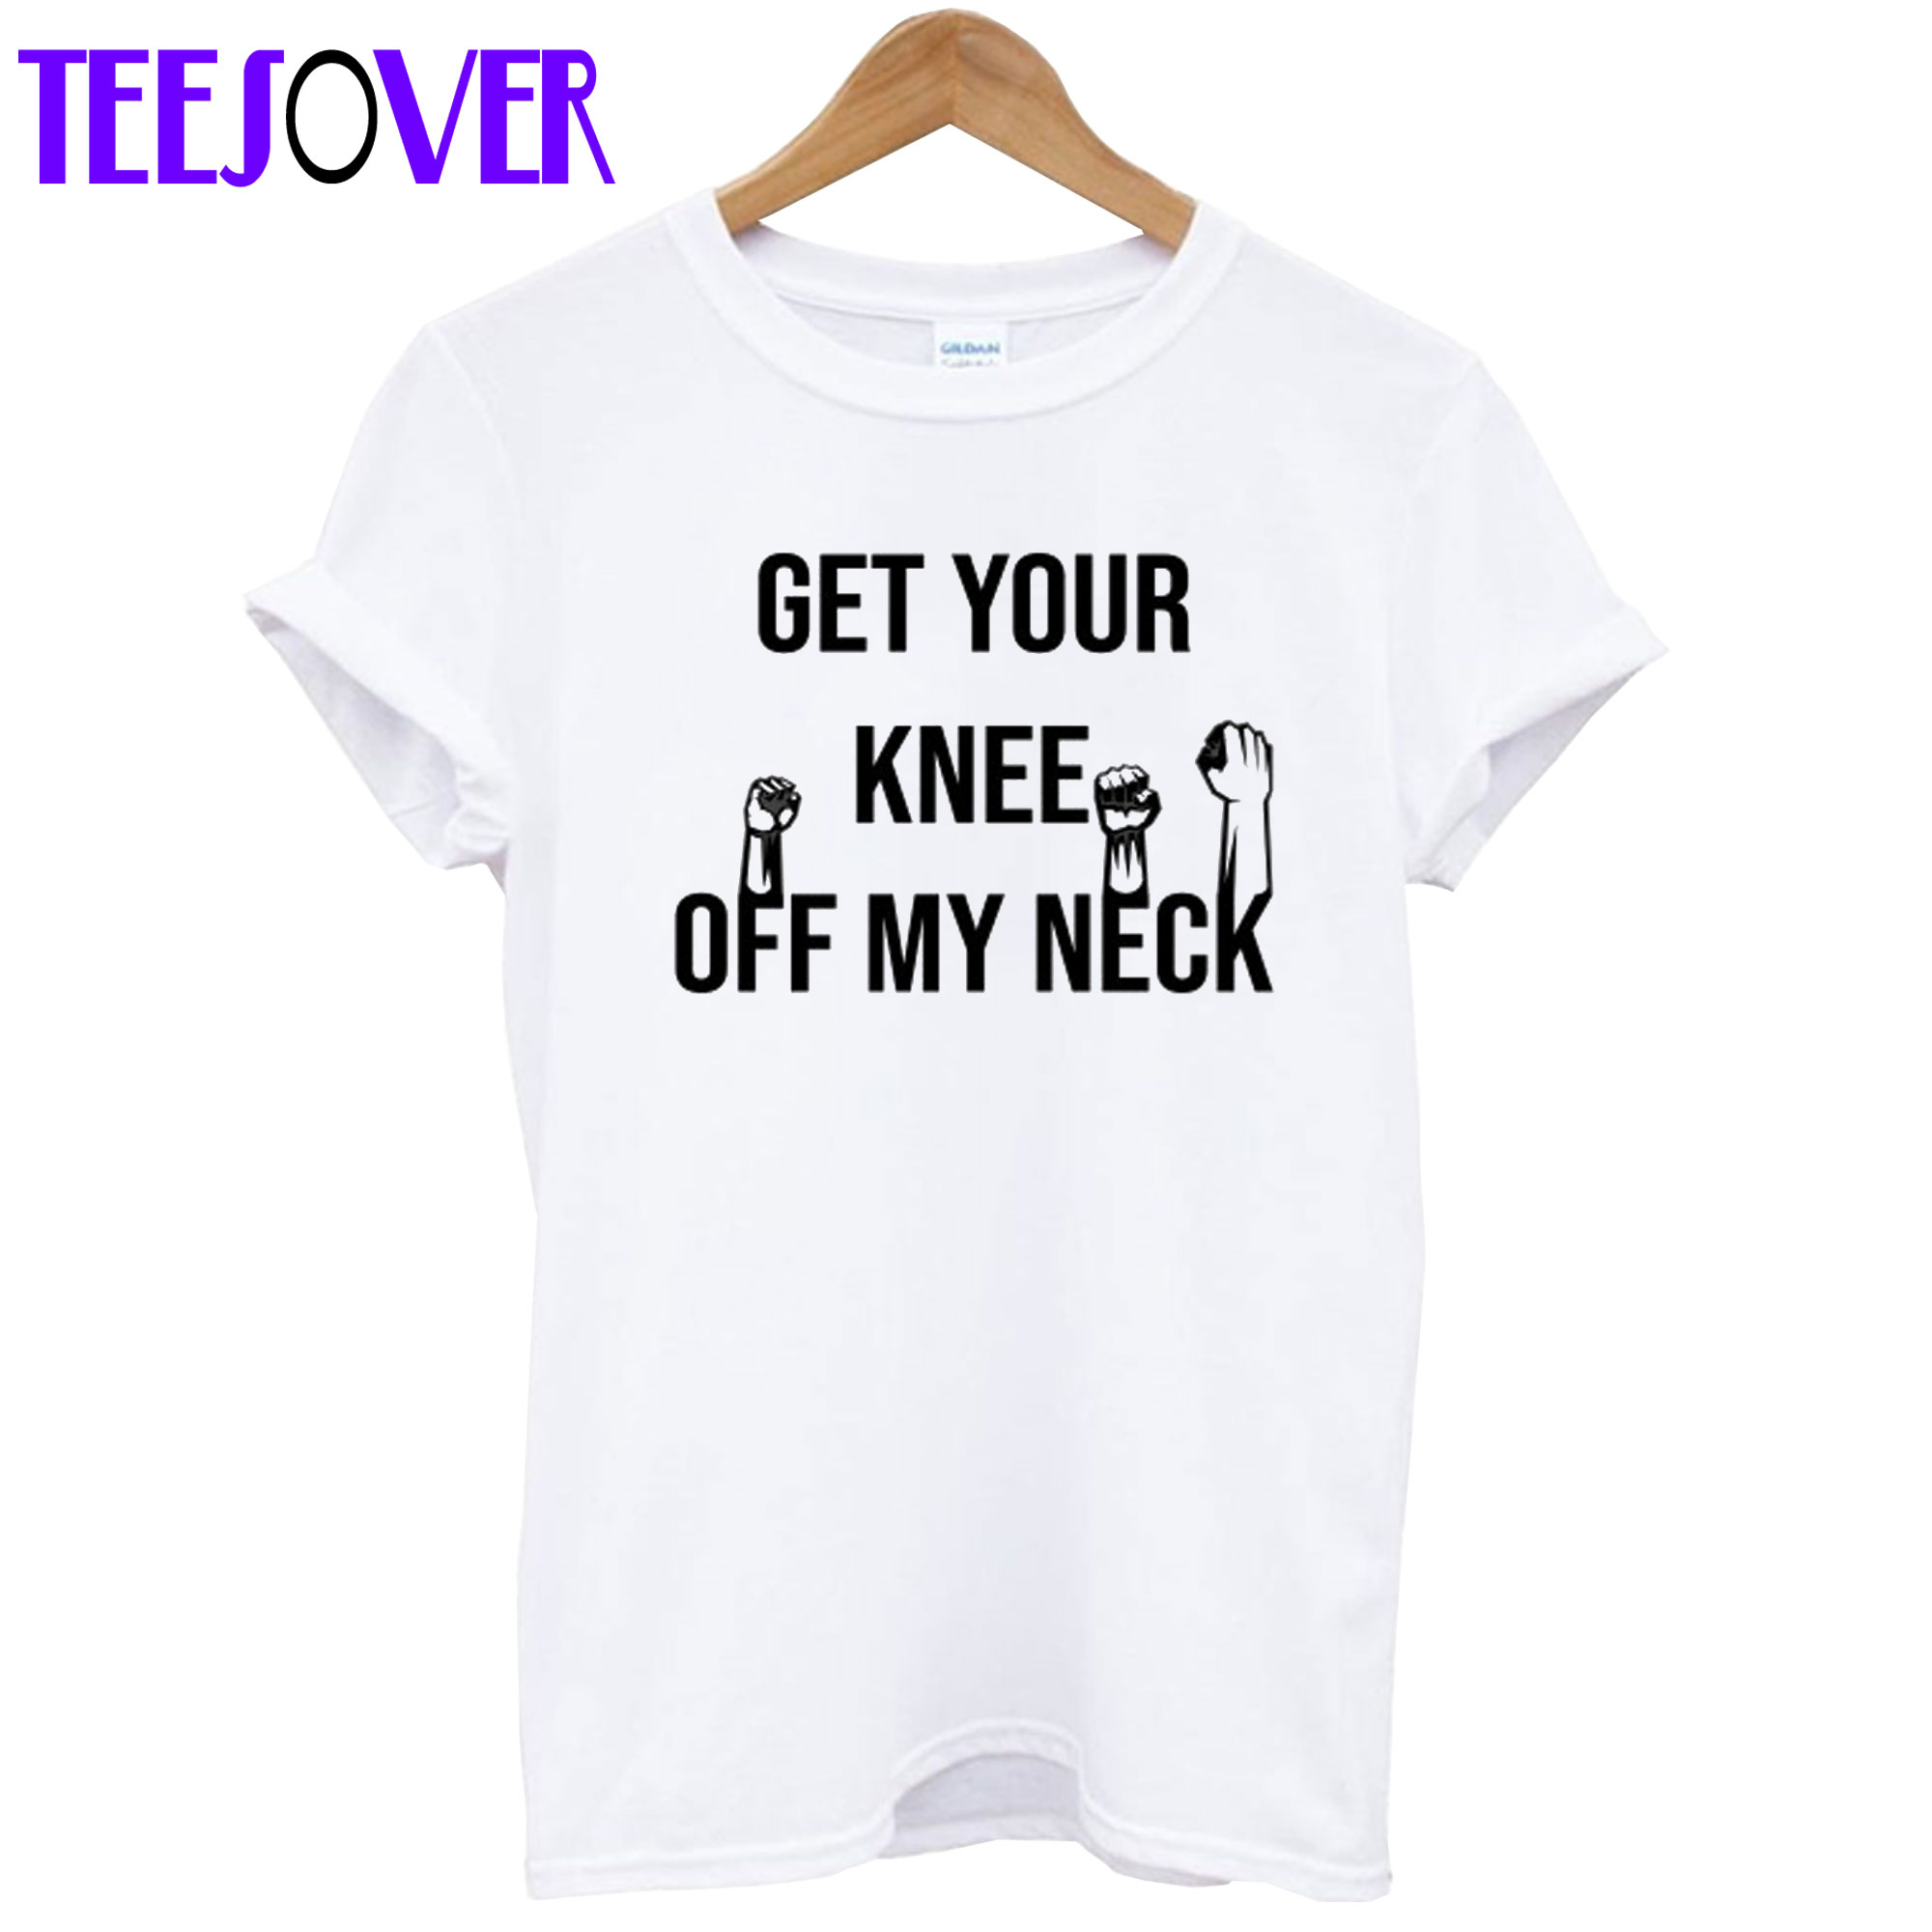 Take Your Knee off My Neck T Shirt